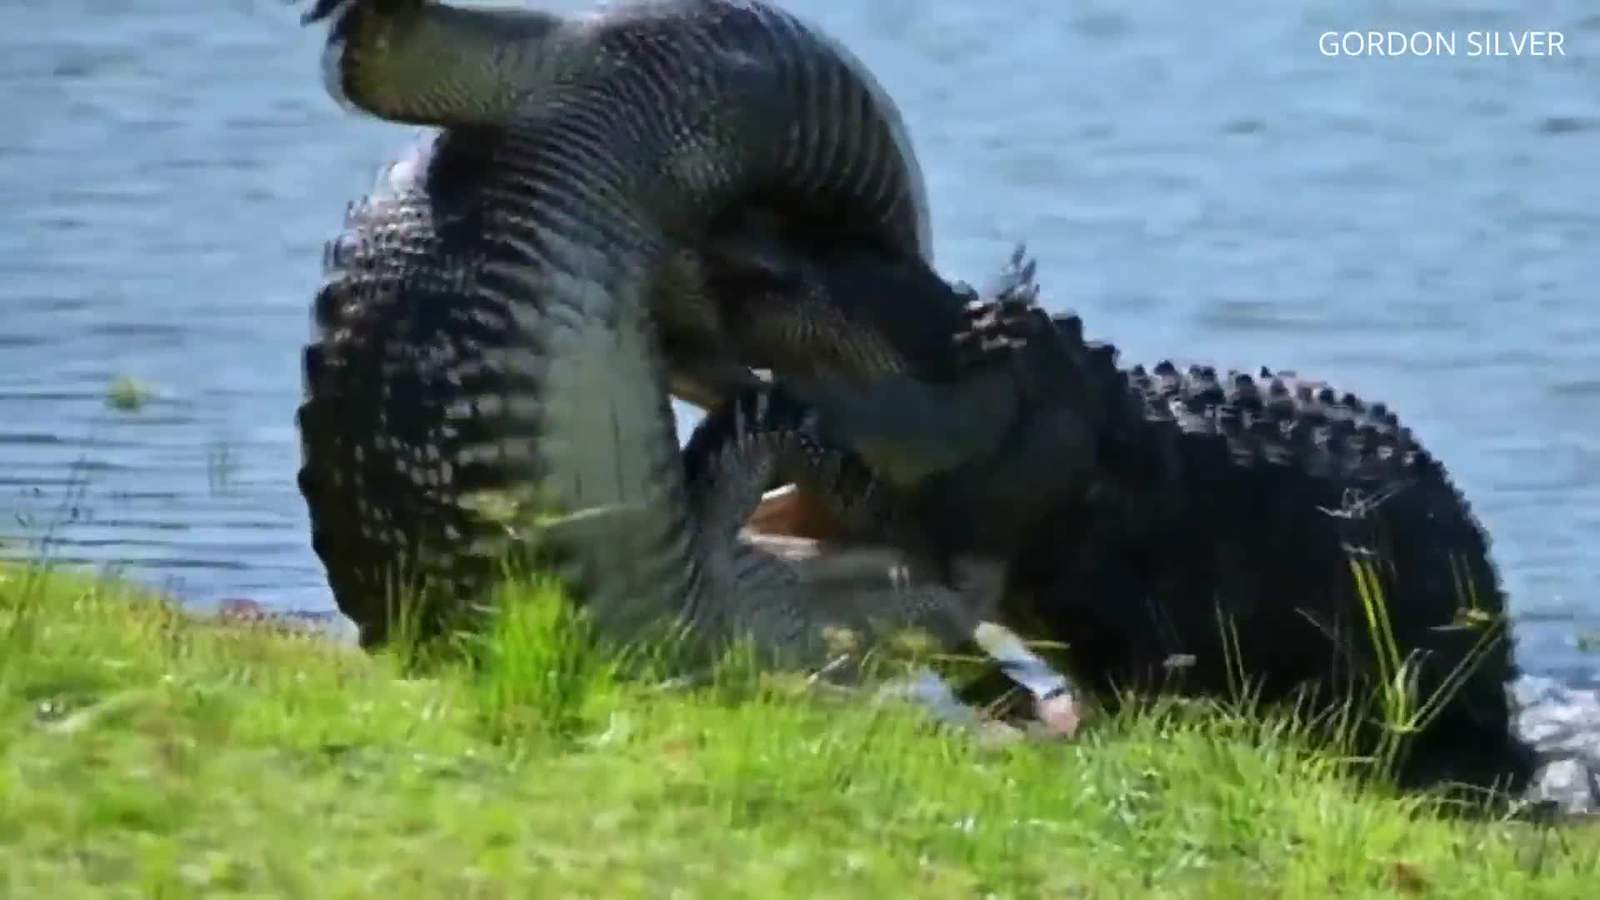 Florida man finds alligators ‘getting to know each other’ as mating season heats up